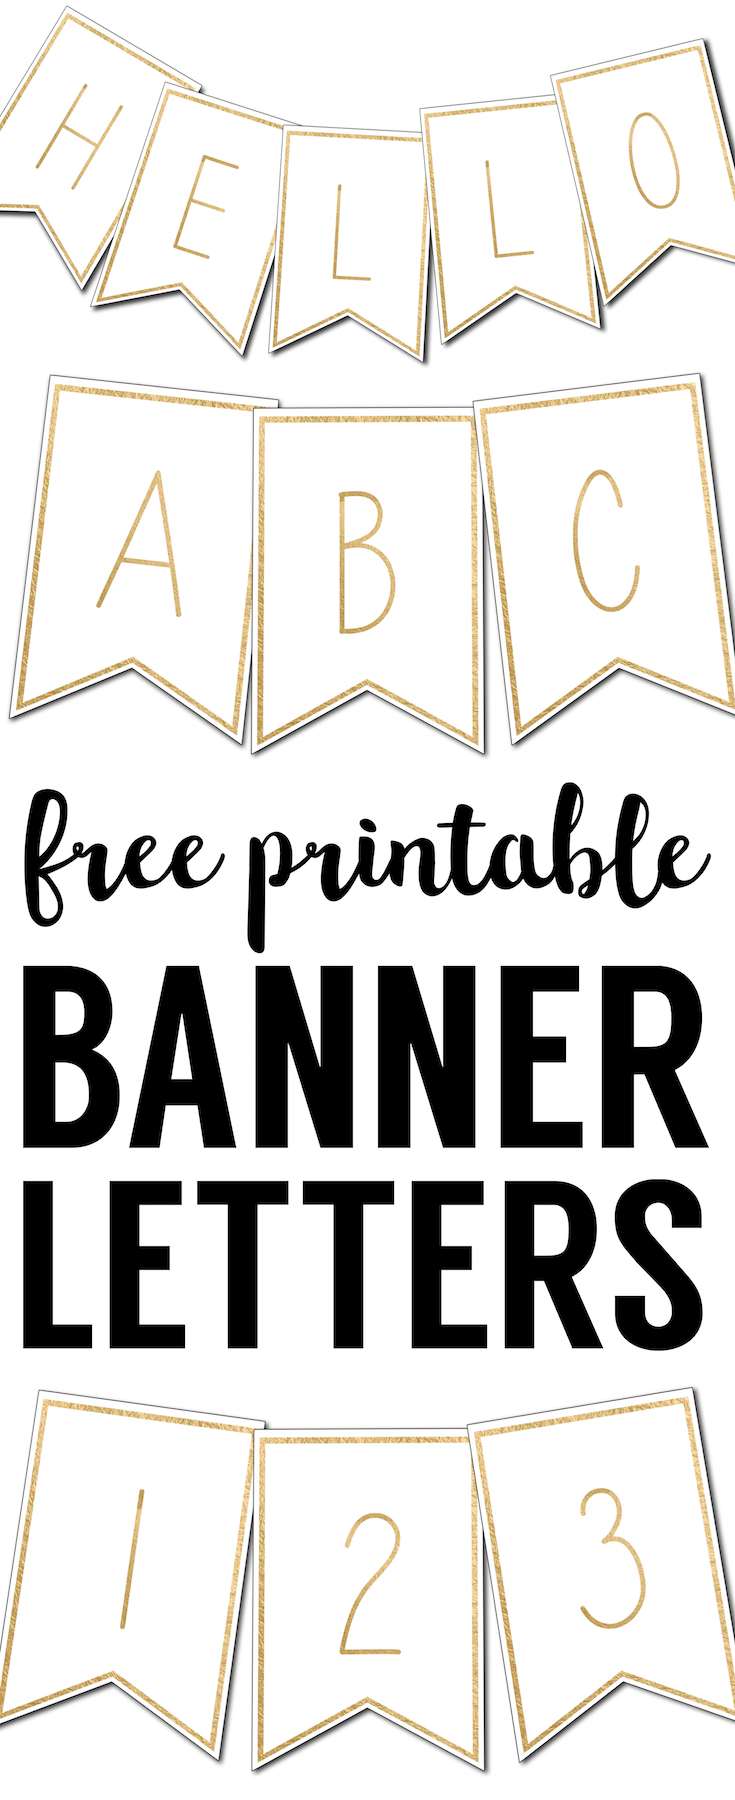 Free Printable Letters For Banners Entire Alphabet Pdf Download